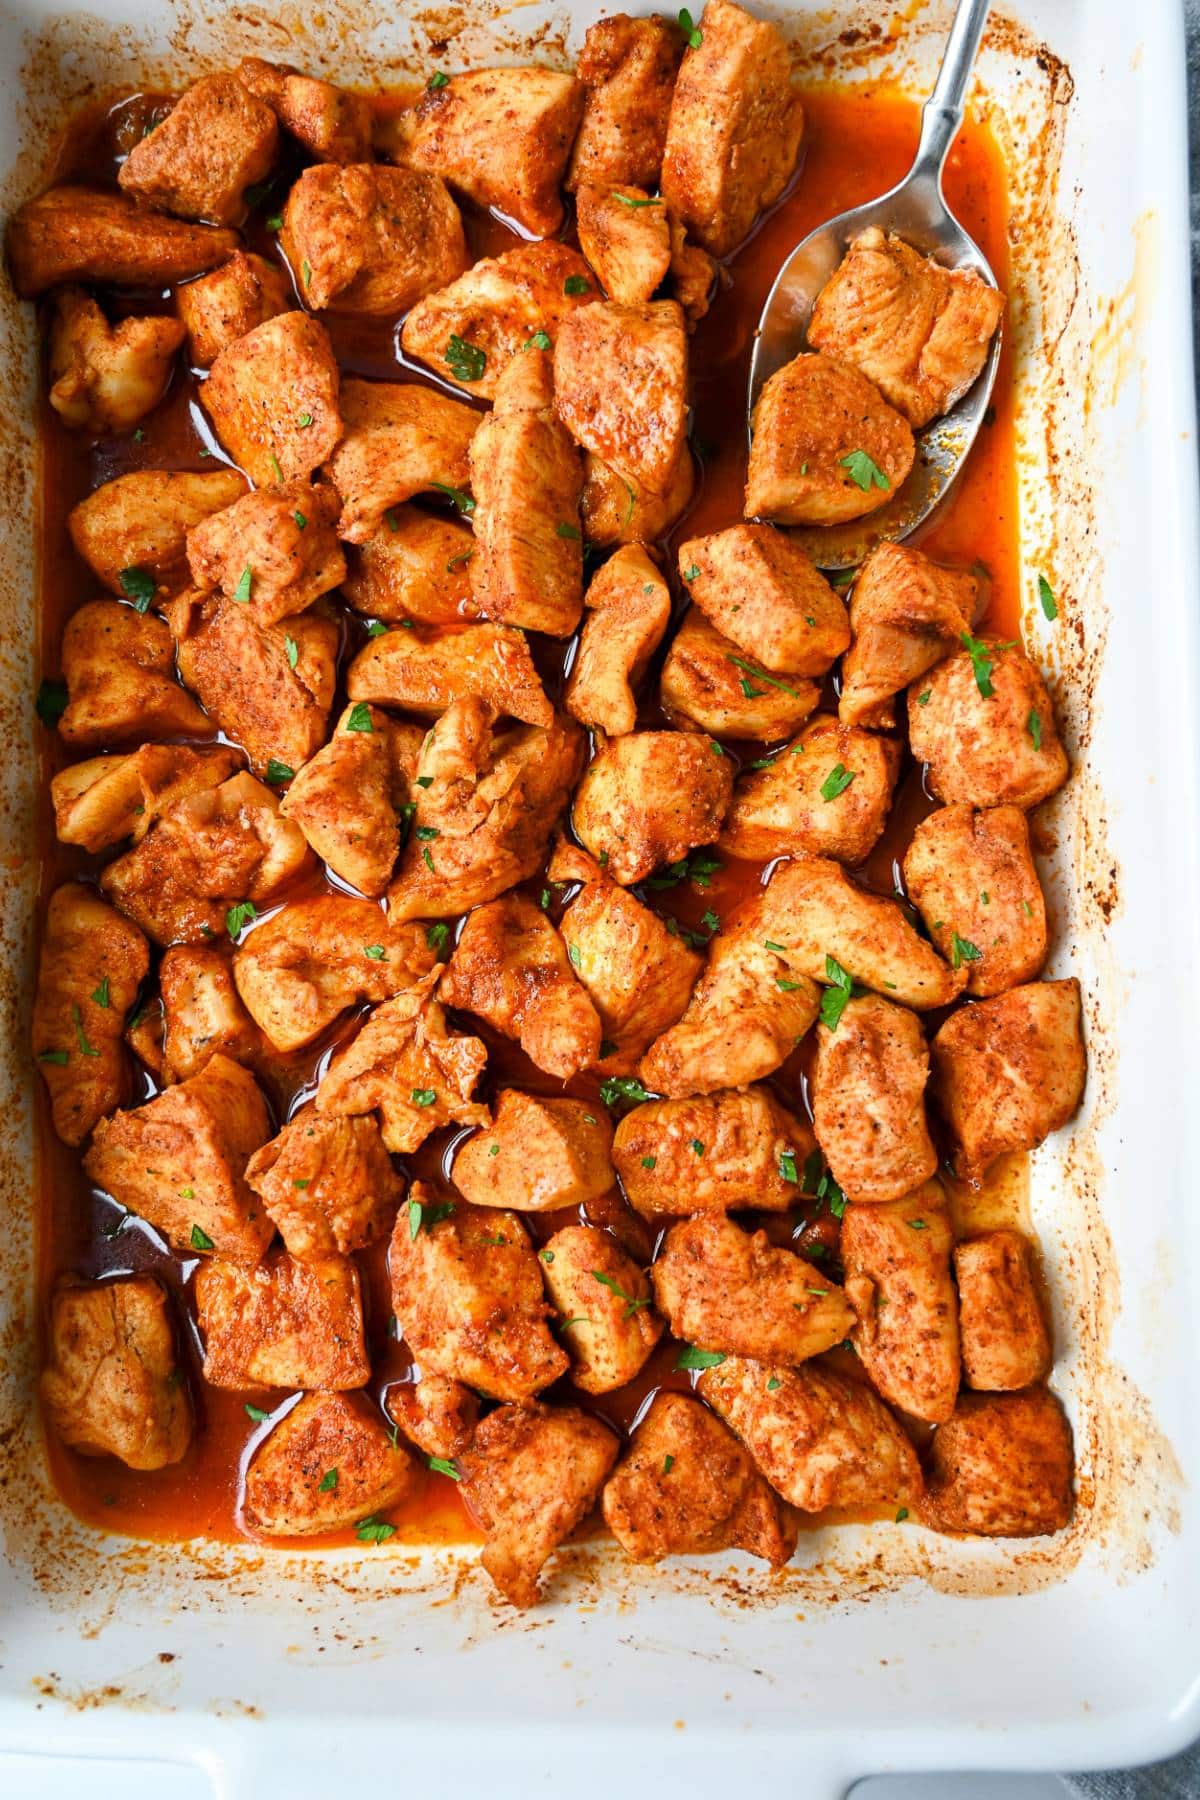 a zoomed out photo of a pan of bite size chicken pieces baked in a spicy sauce with pan juices